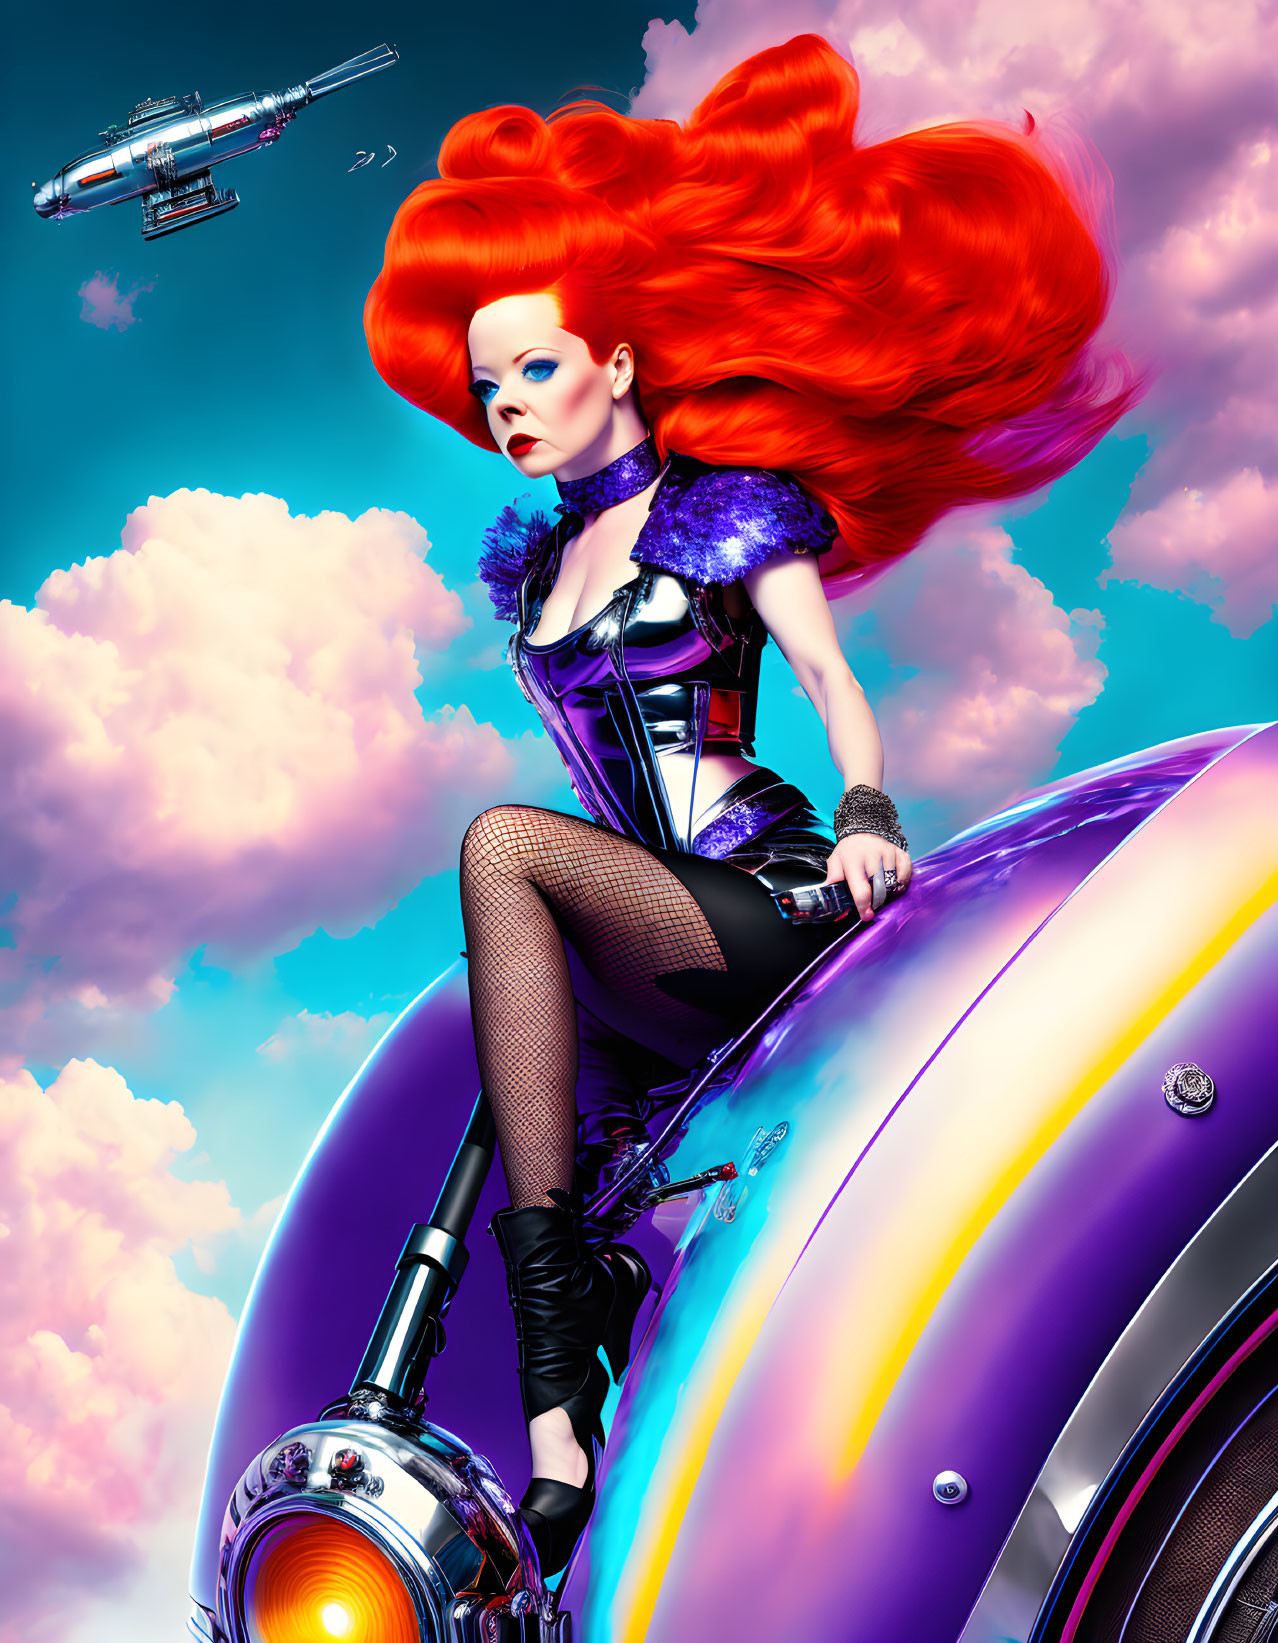 Vibrant red-haired woman on futuristic motorcycle with spaceship in sky